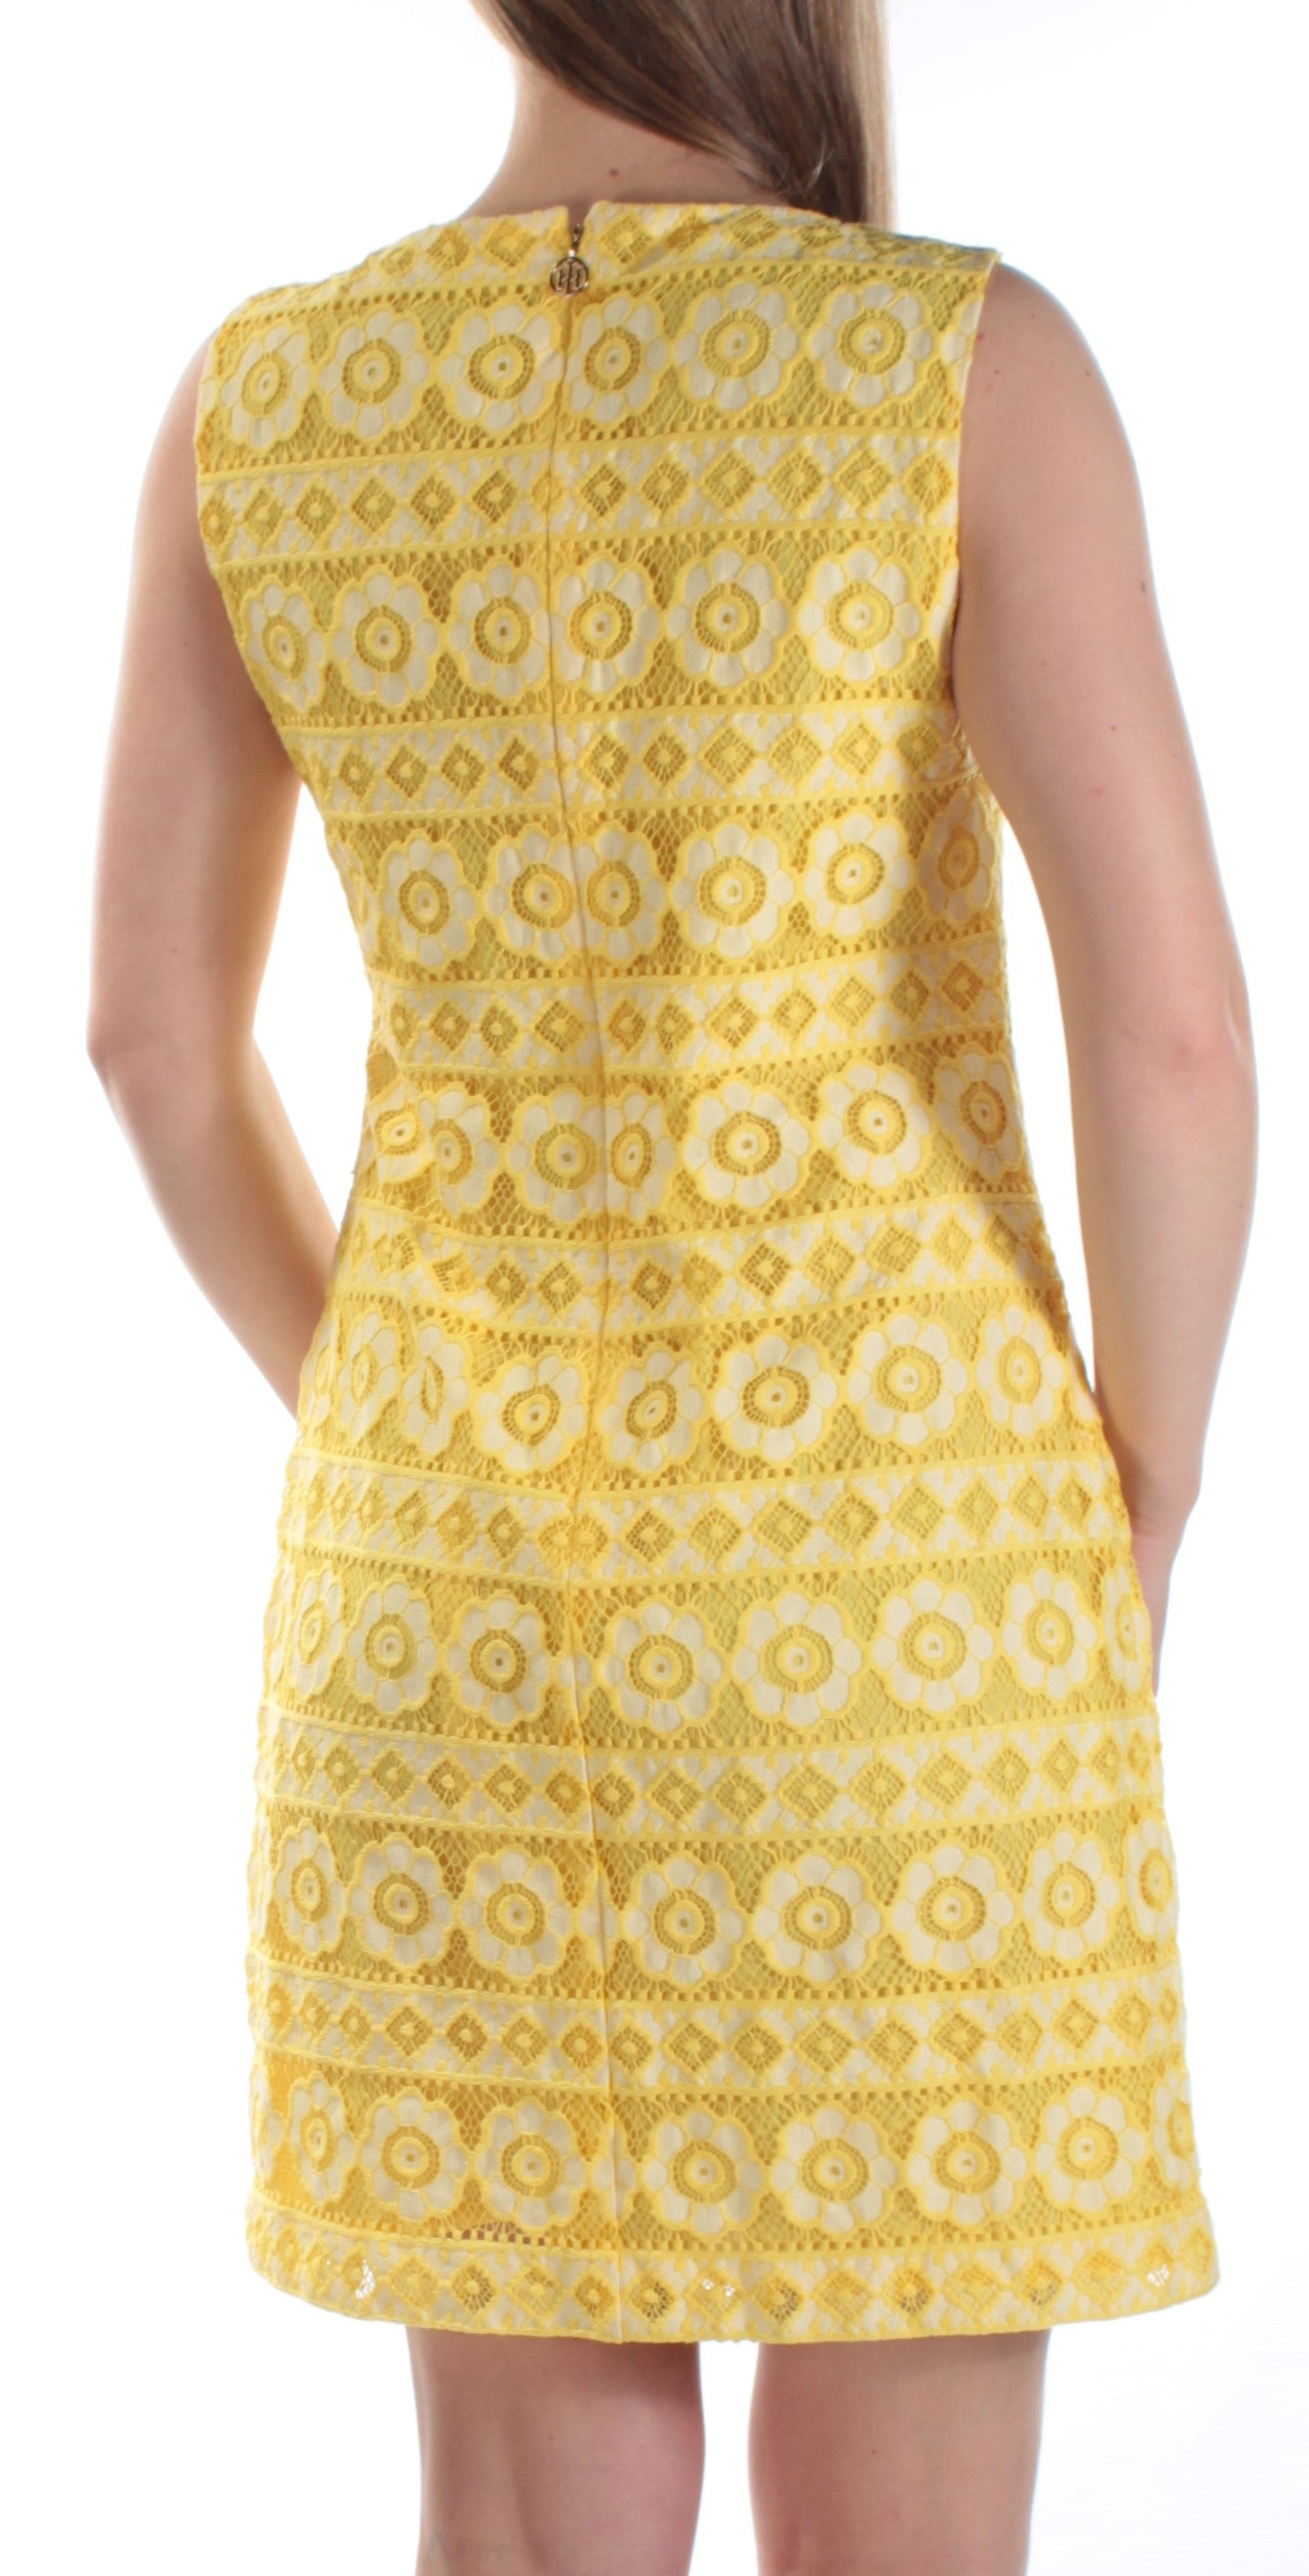 TOMMY HILFIGER Womens Yellow Eyelet Floral Sleeveless Jewel Neck Above The Knee Dress